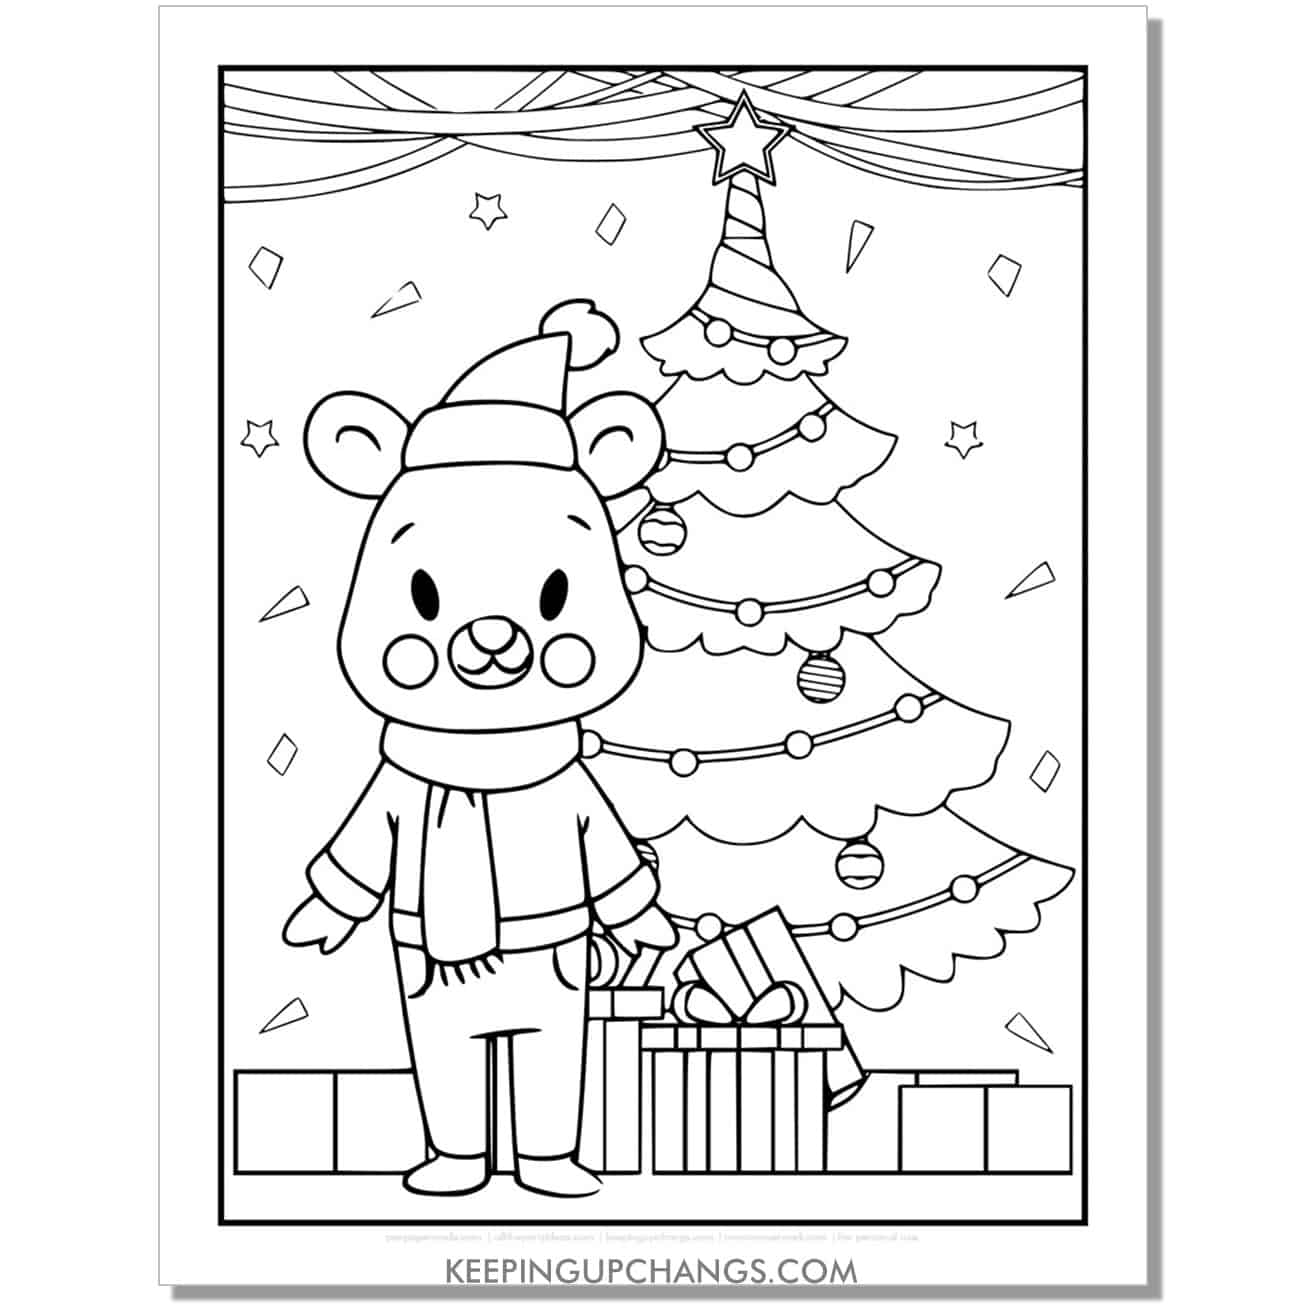 free bear in front of tree with presents full size christmas animal coloring page.